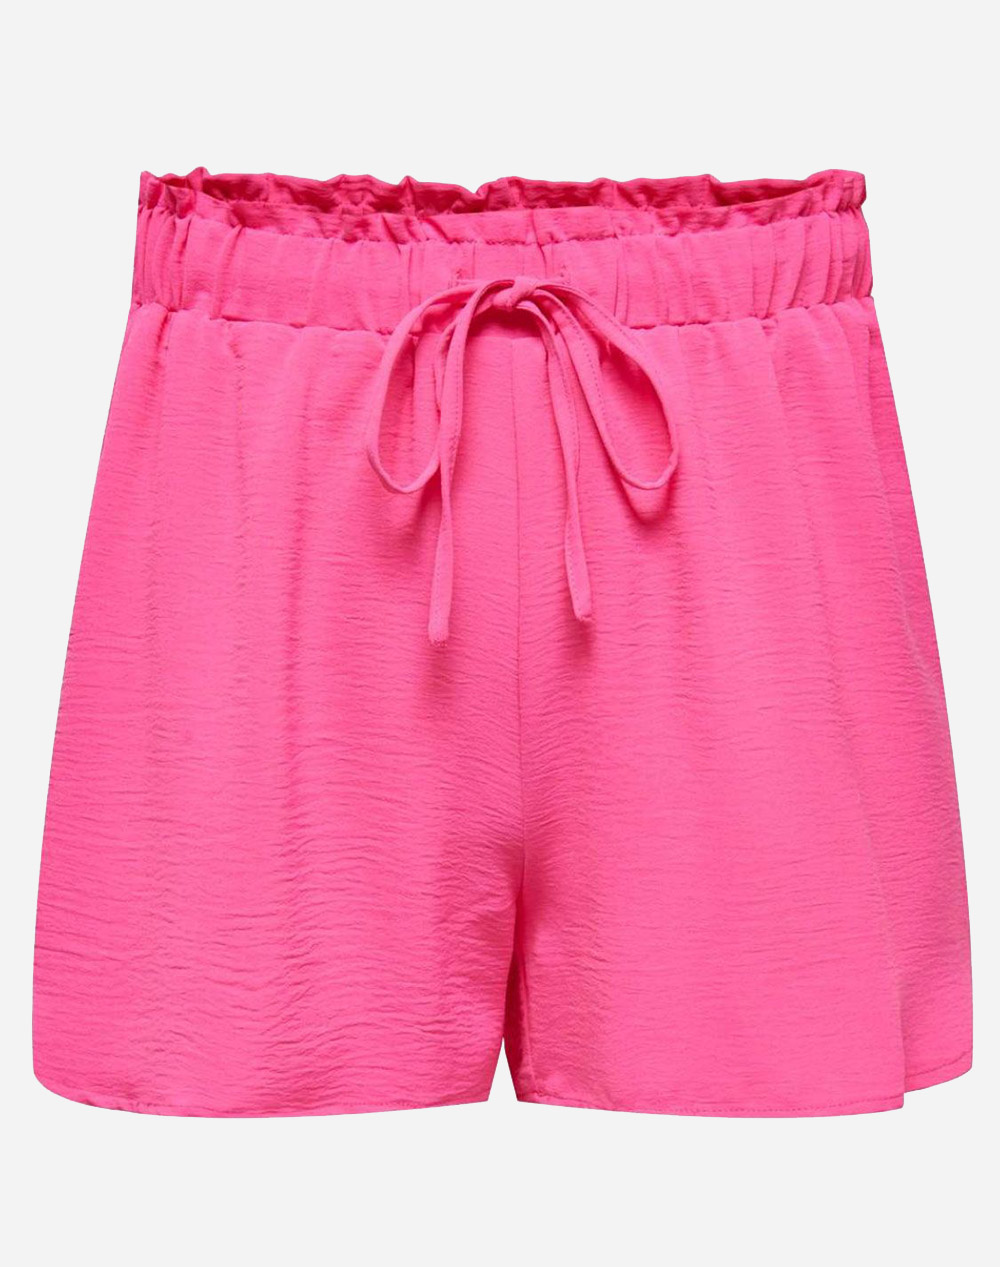 ONLY ONLMETTE SHORTS WVN 15250165-Carmine Rose Pink 3610AONLY2400023_XR20499